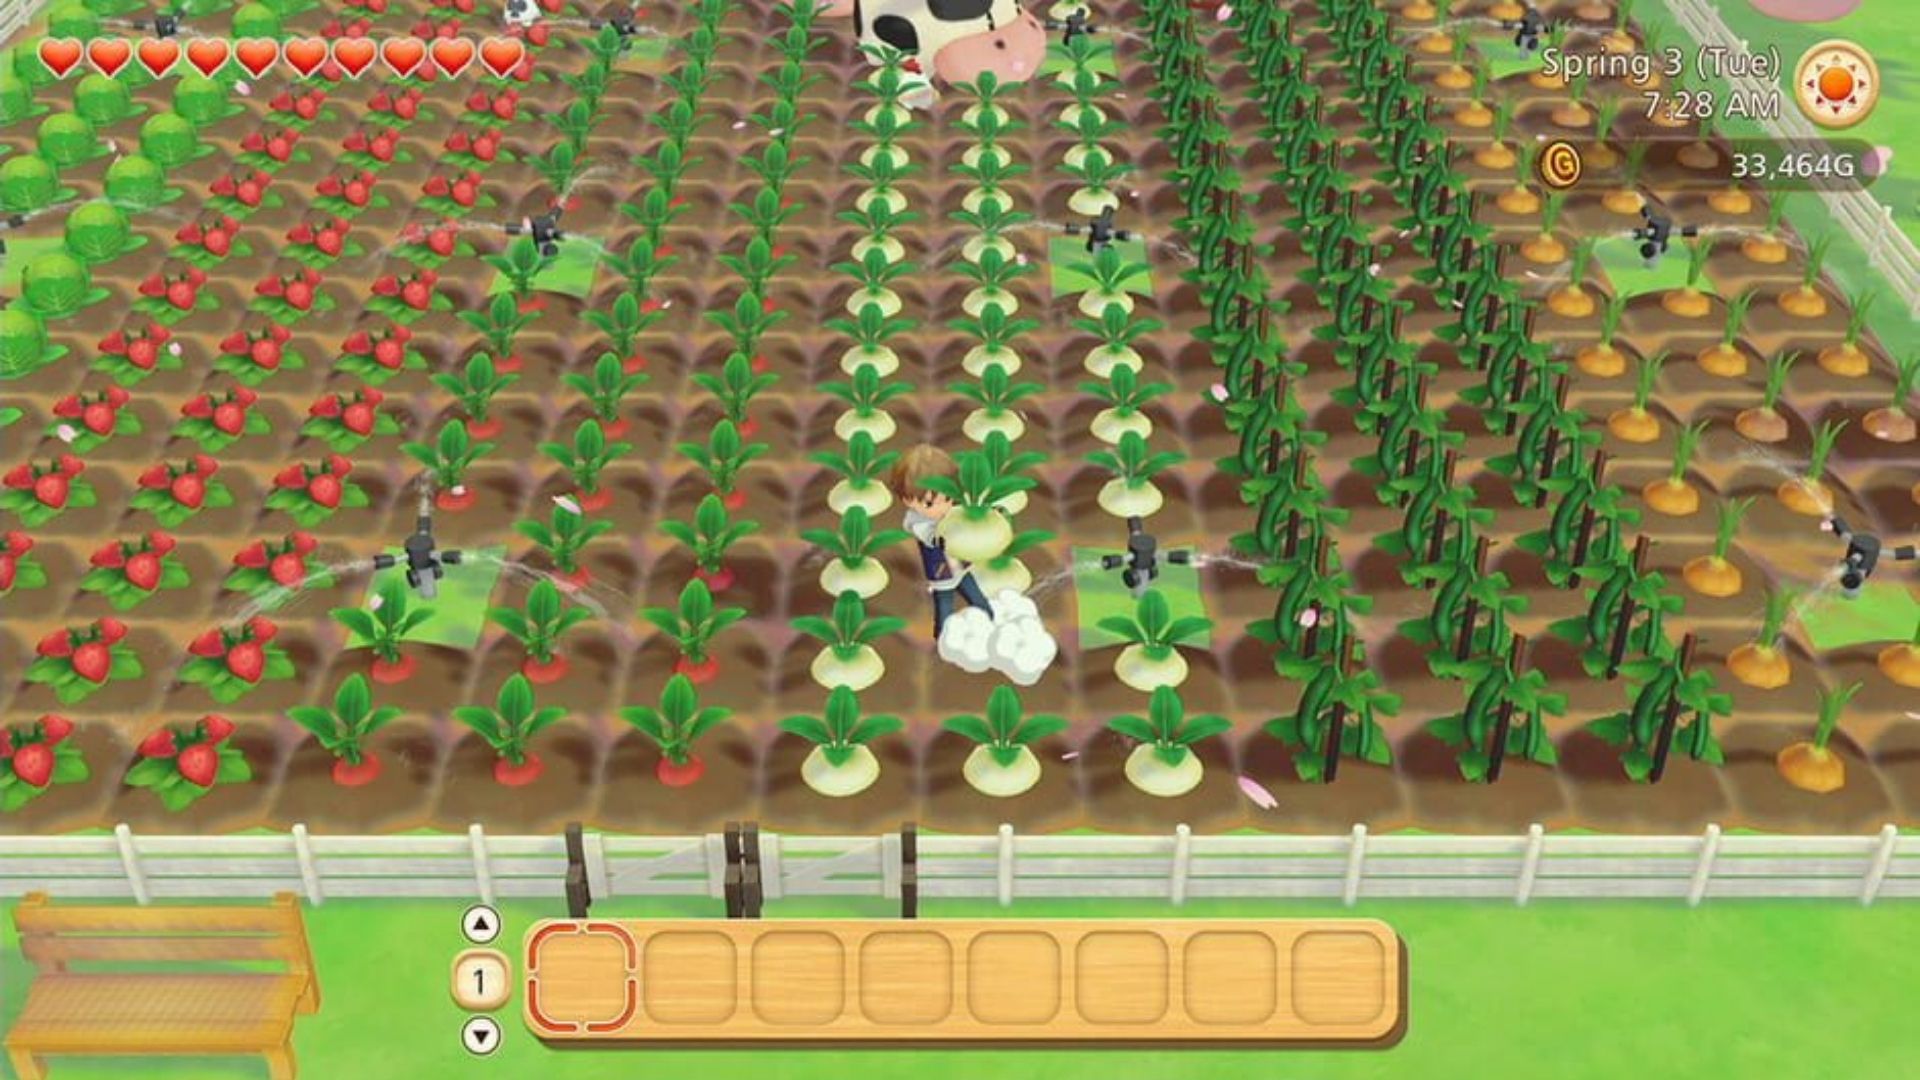 Gardening games on Switch and mobile Pocket Tactics